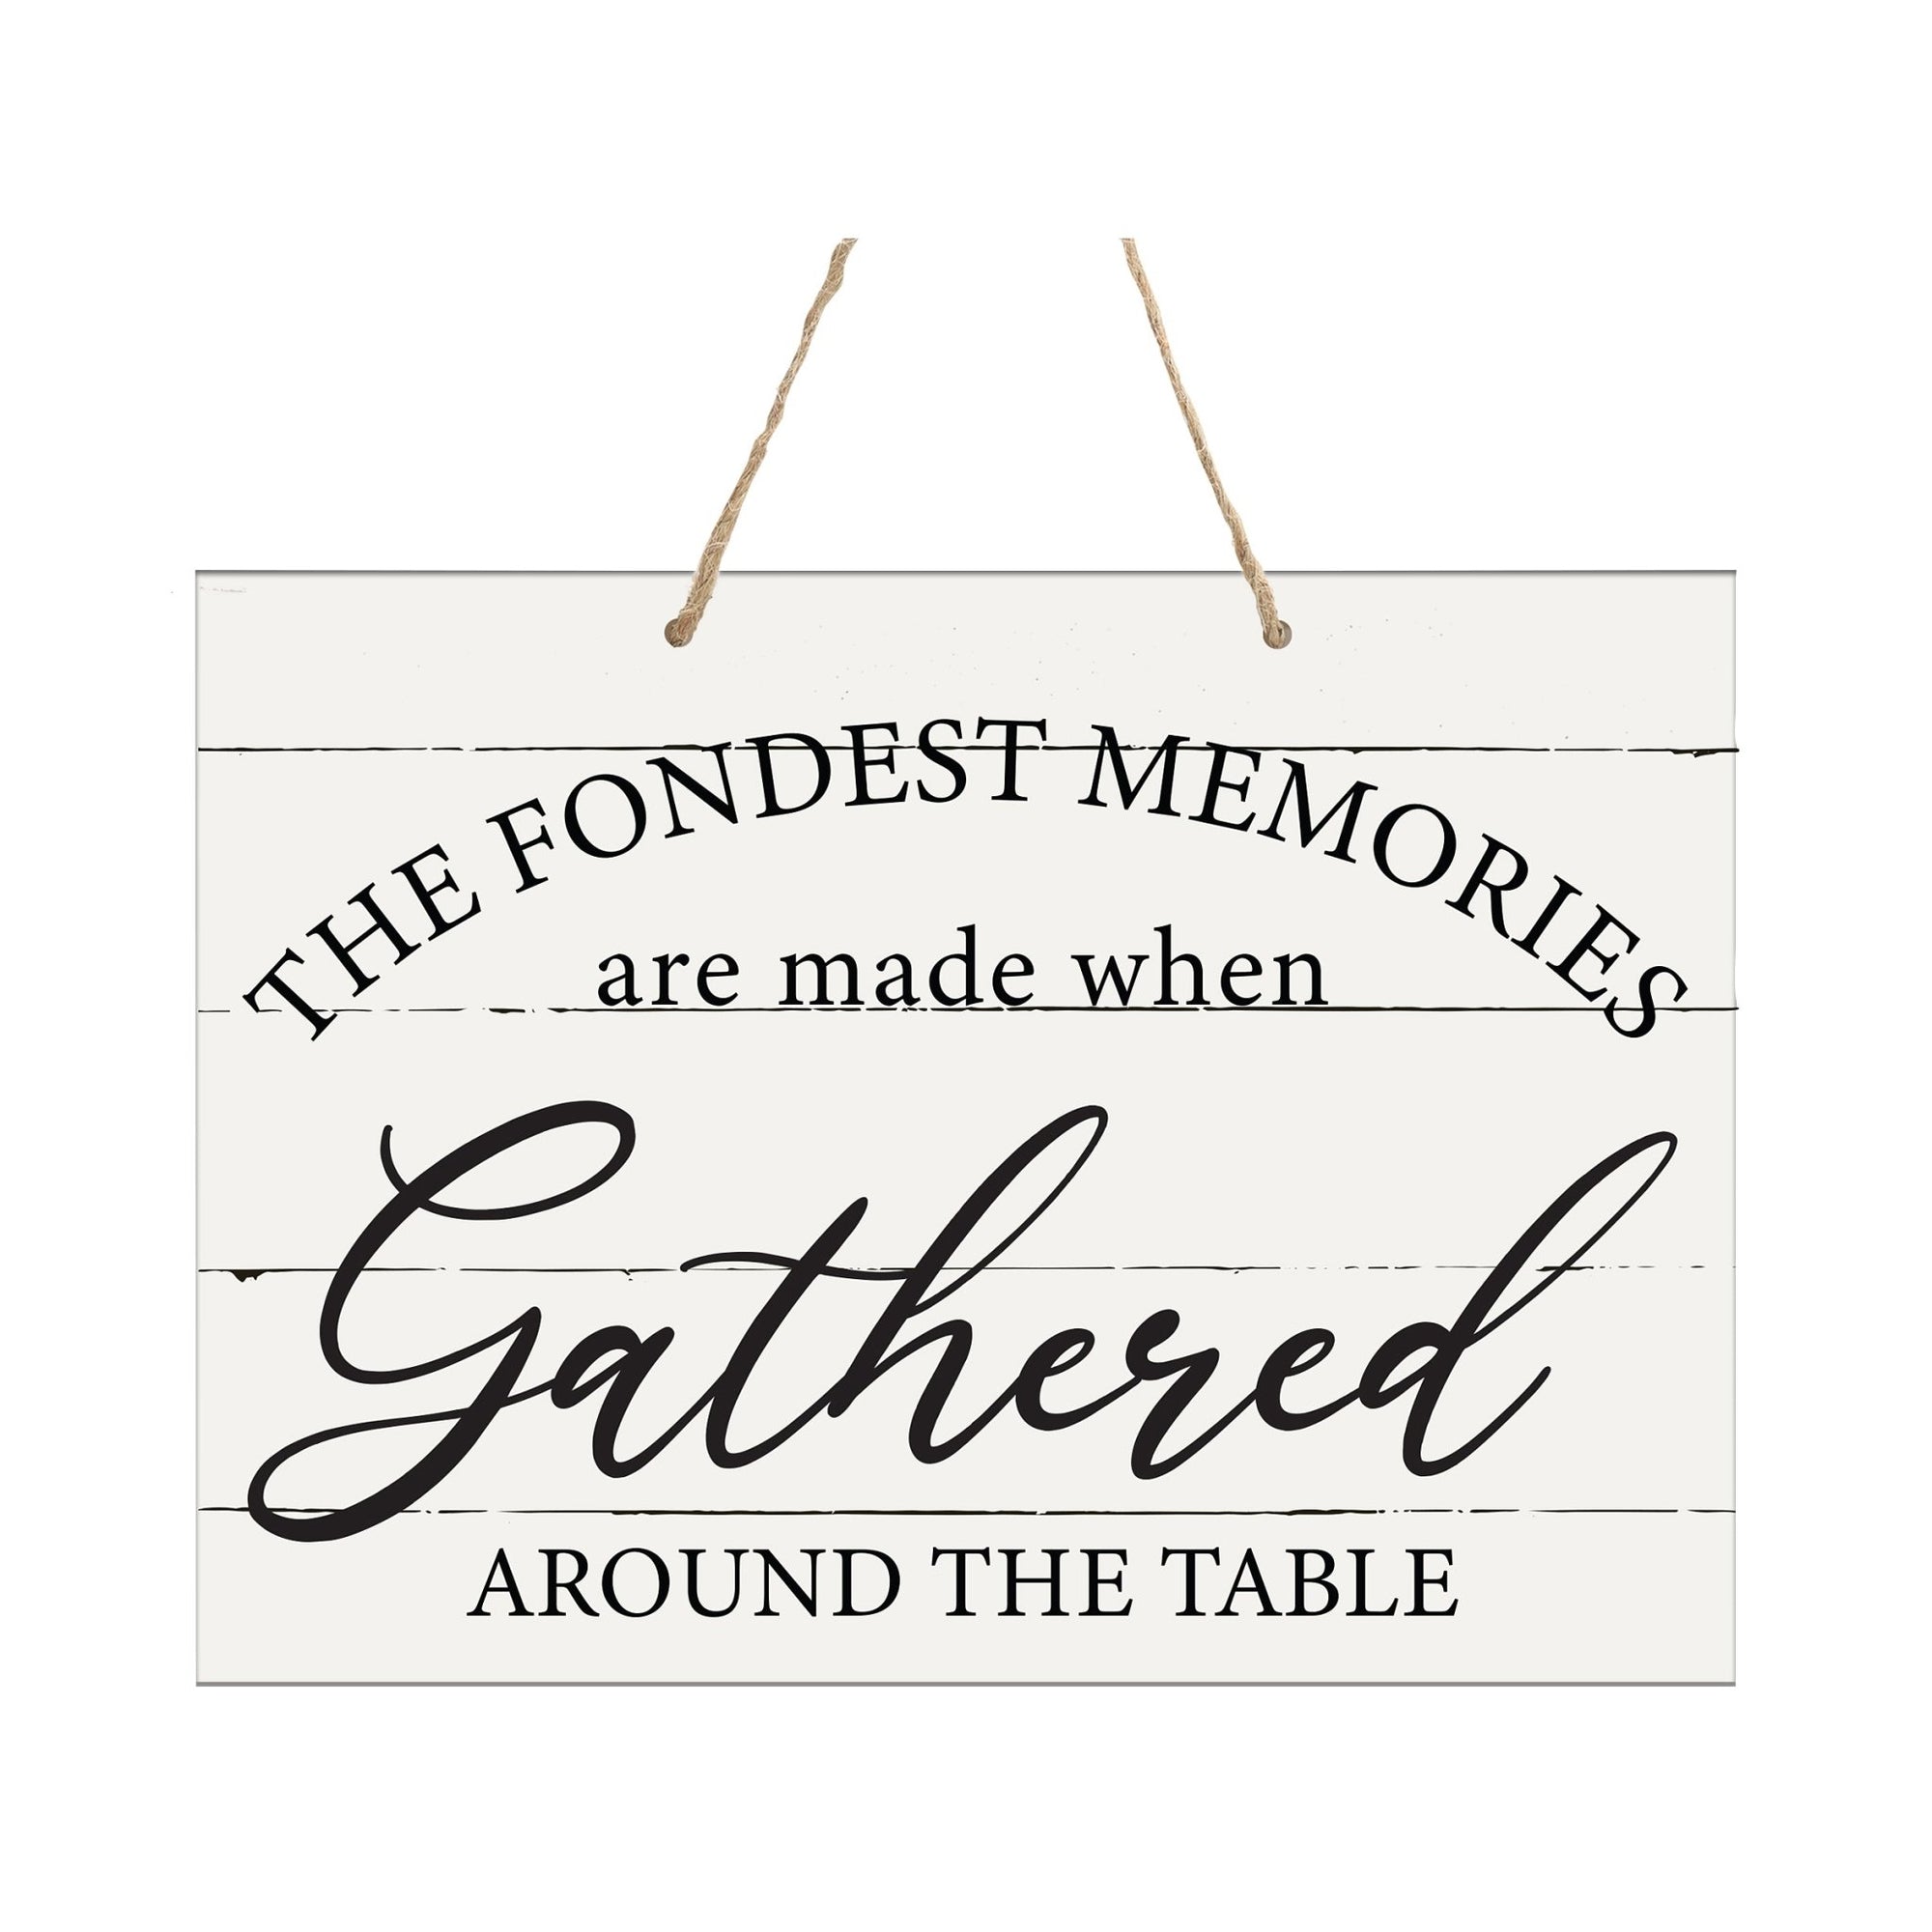 Modern Wooden Horizontal Wall Hanging Rope Sign 12x15 - Home - LifeSong Milestones